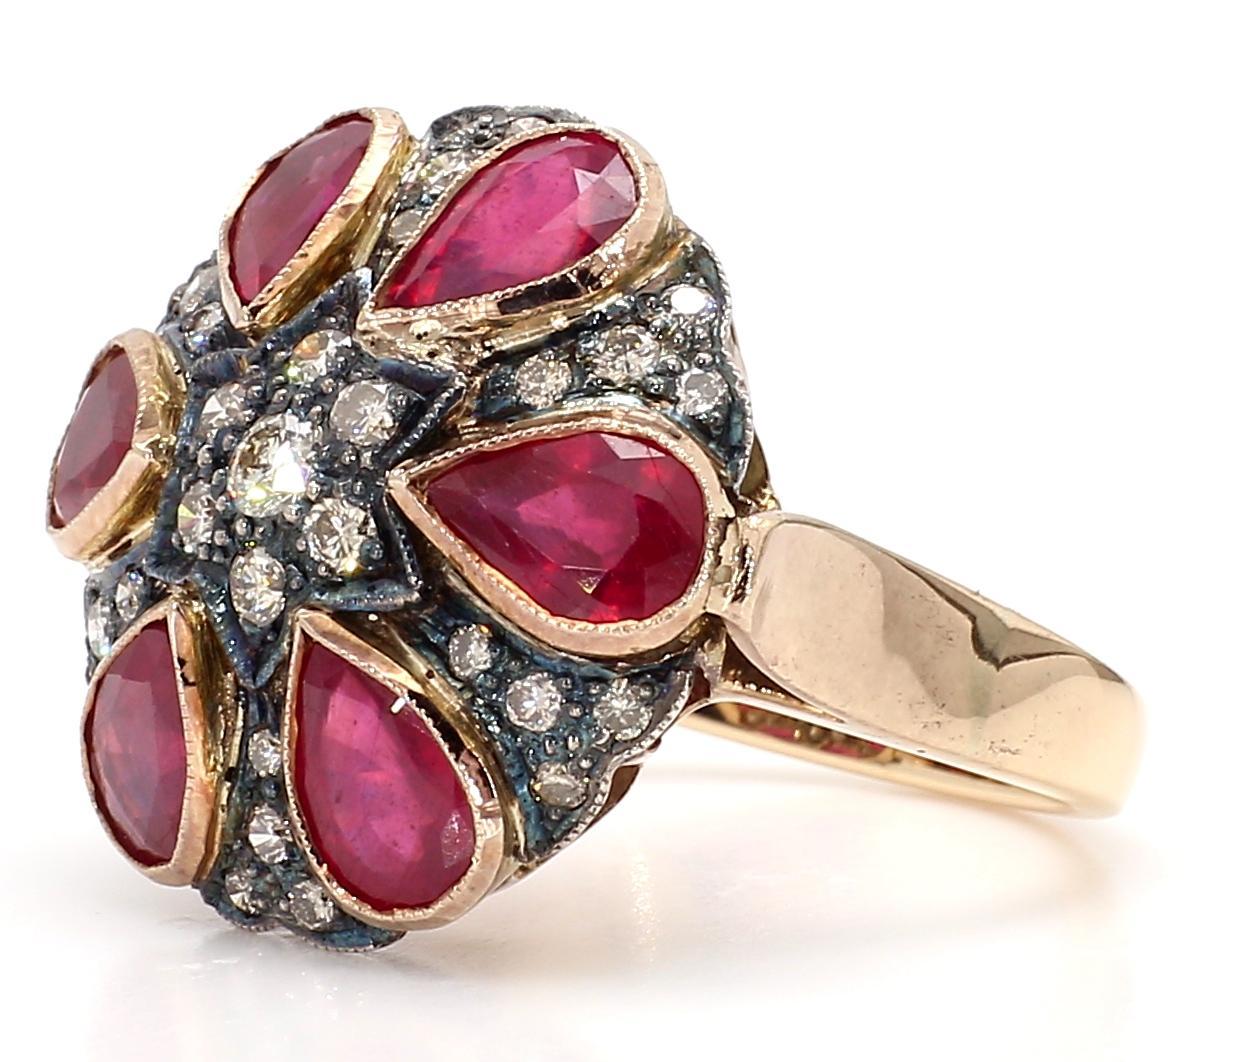 Introducing our magnificent Antique Ruby Ring, a true testament to timeless beauty and vintage elegance. This exceptional piece features a stunning 7.22-carat ruby, complemented by 1.00 carat of diamonds, all set in a luxurious 18K gold band